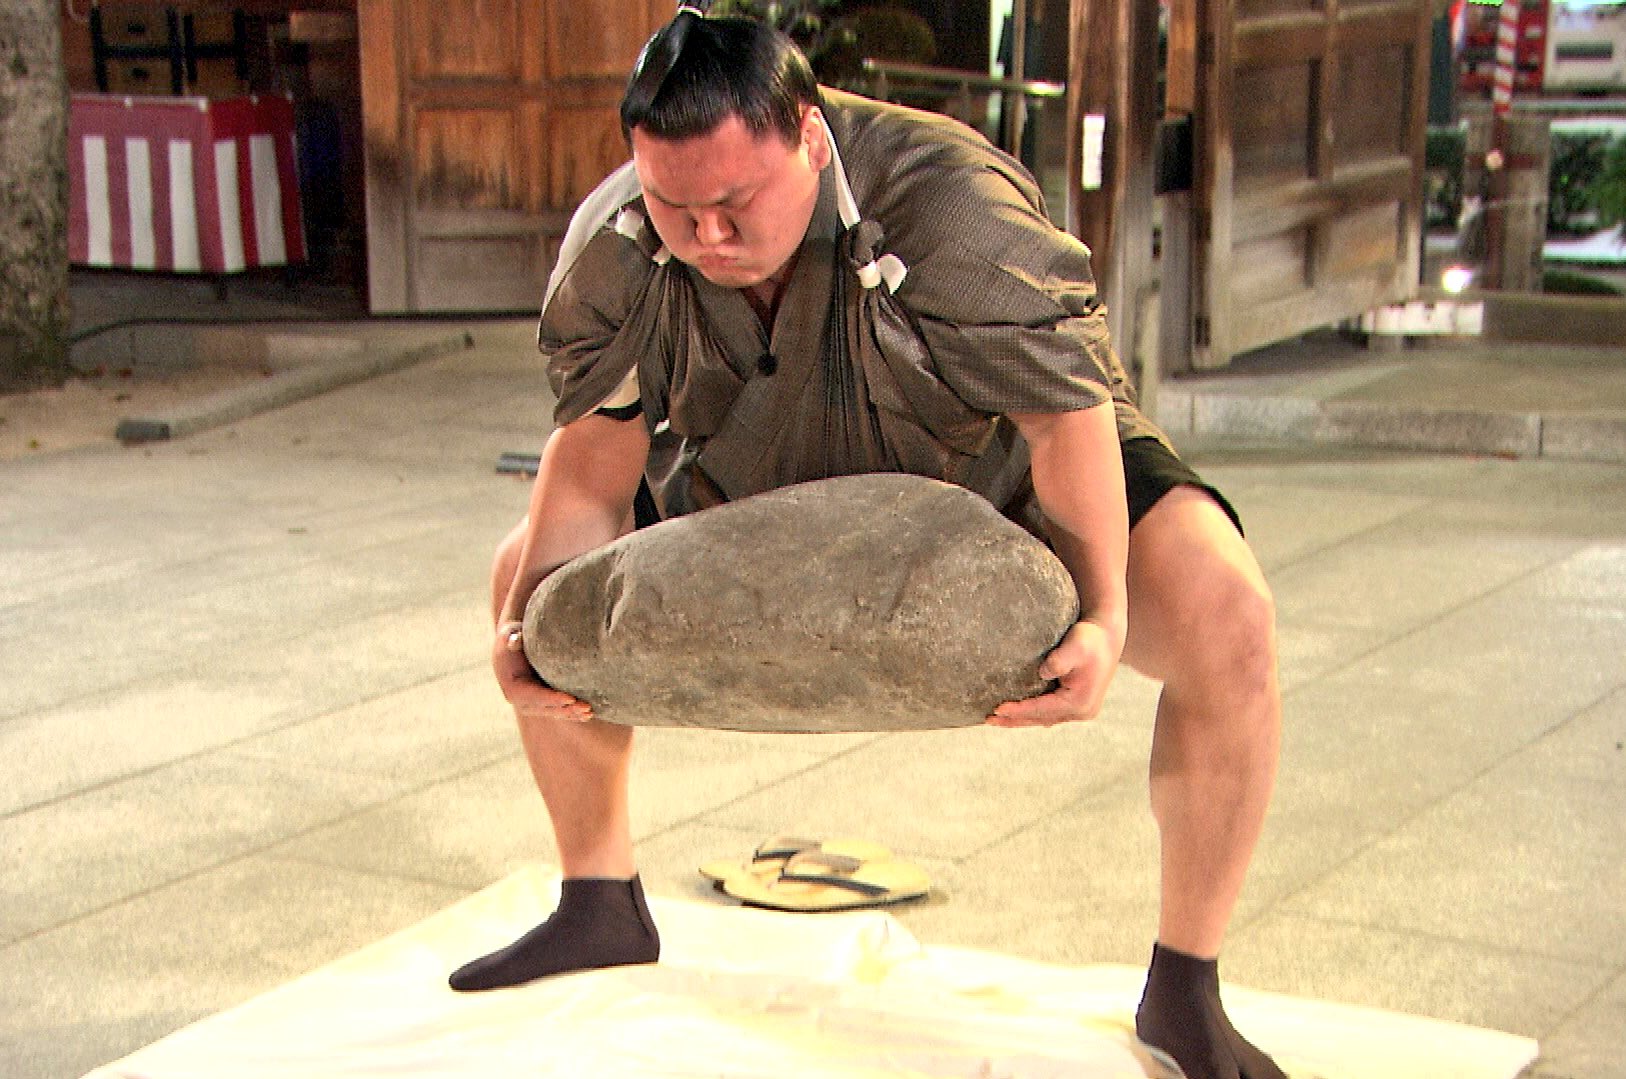 Are you stronger than a sumo wrestler? lead image.